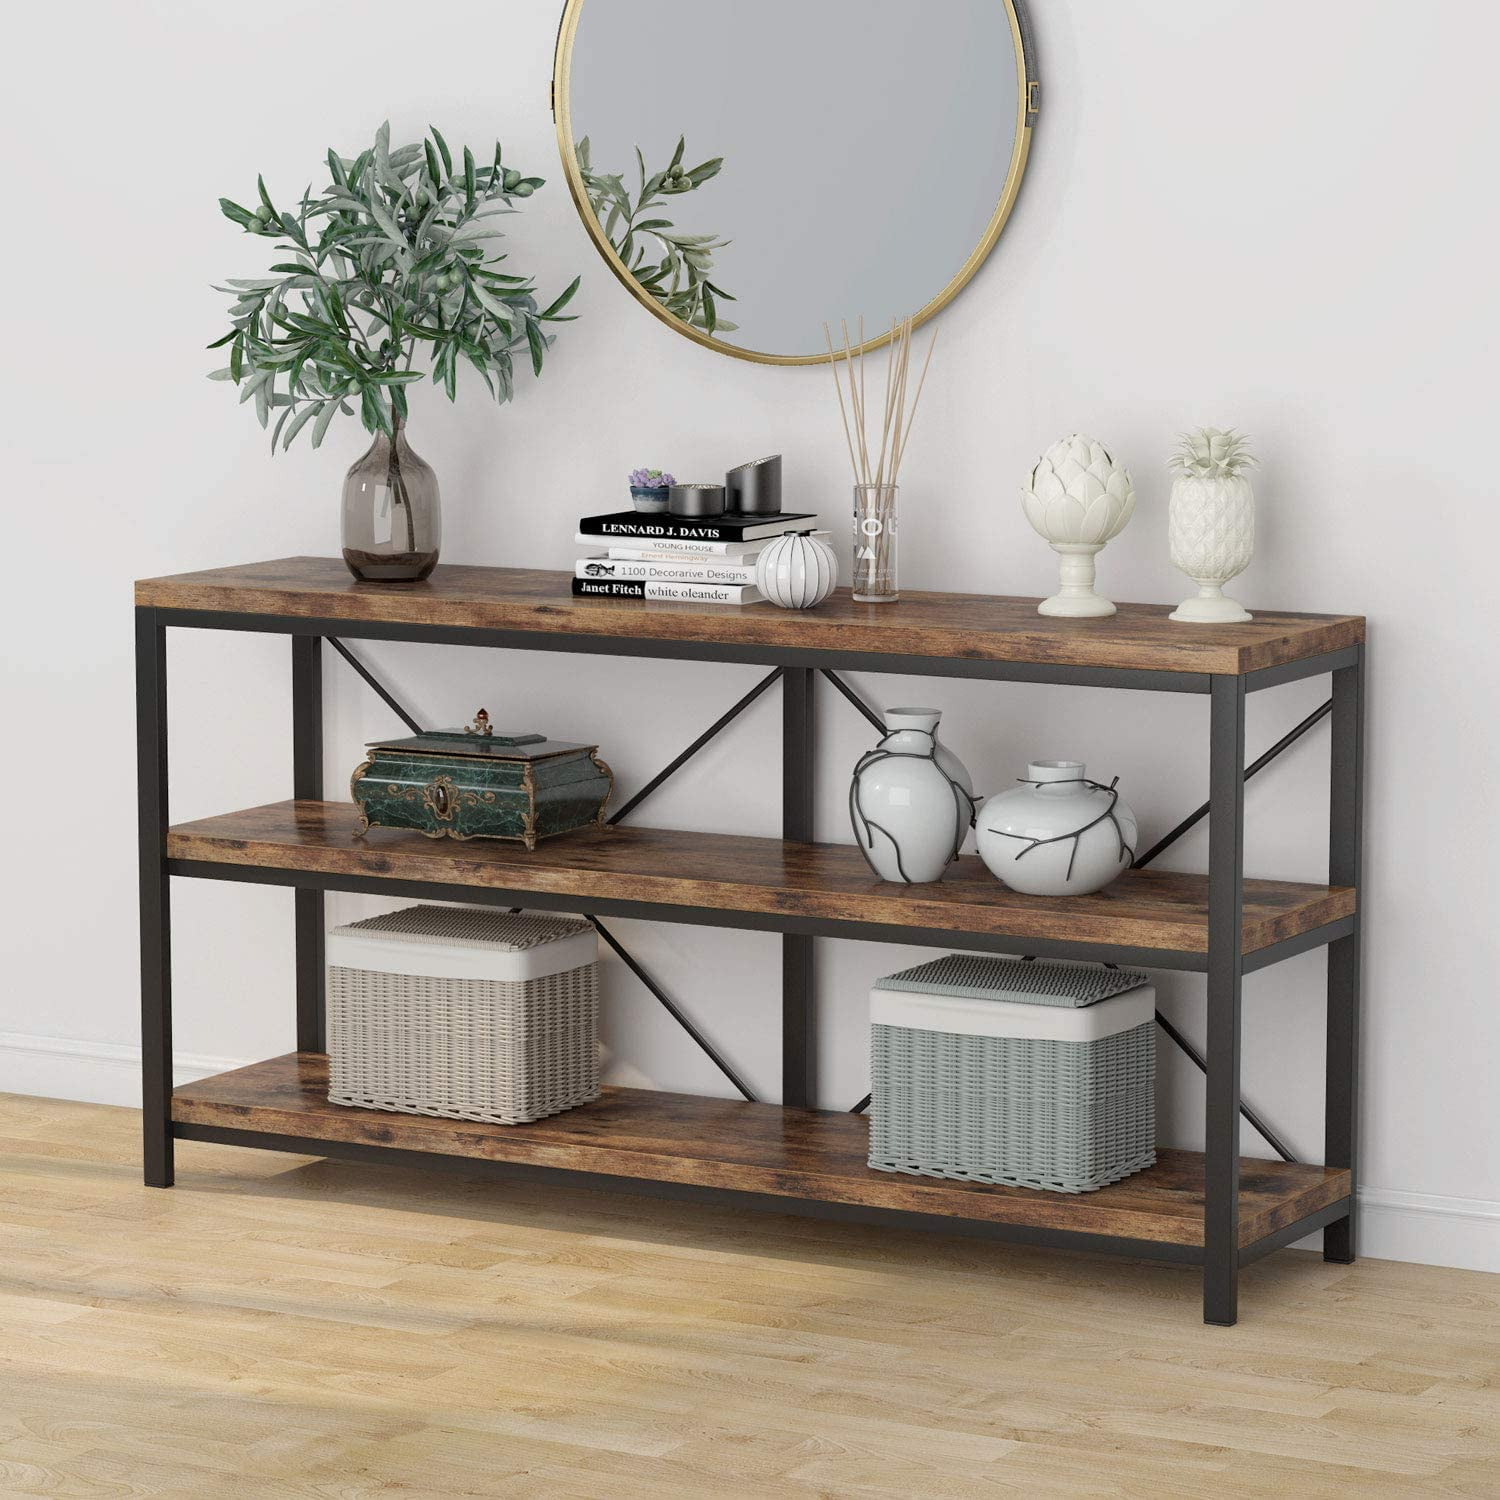 3 Tiers Console Table Side Sofa Porch Accent Hall Entrance Living Room Furniture 